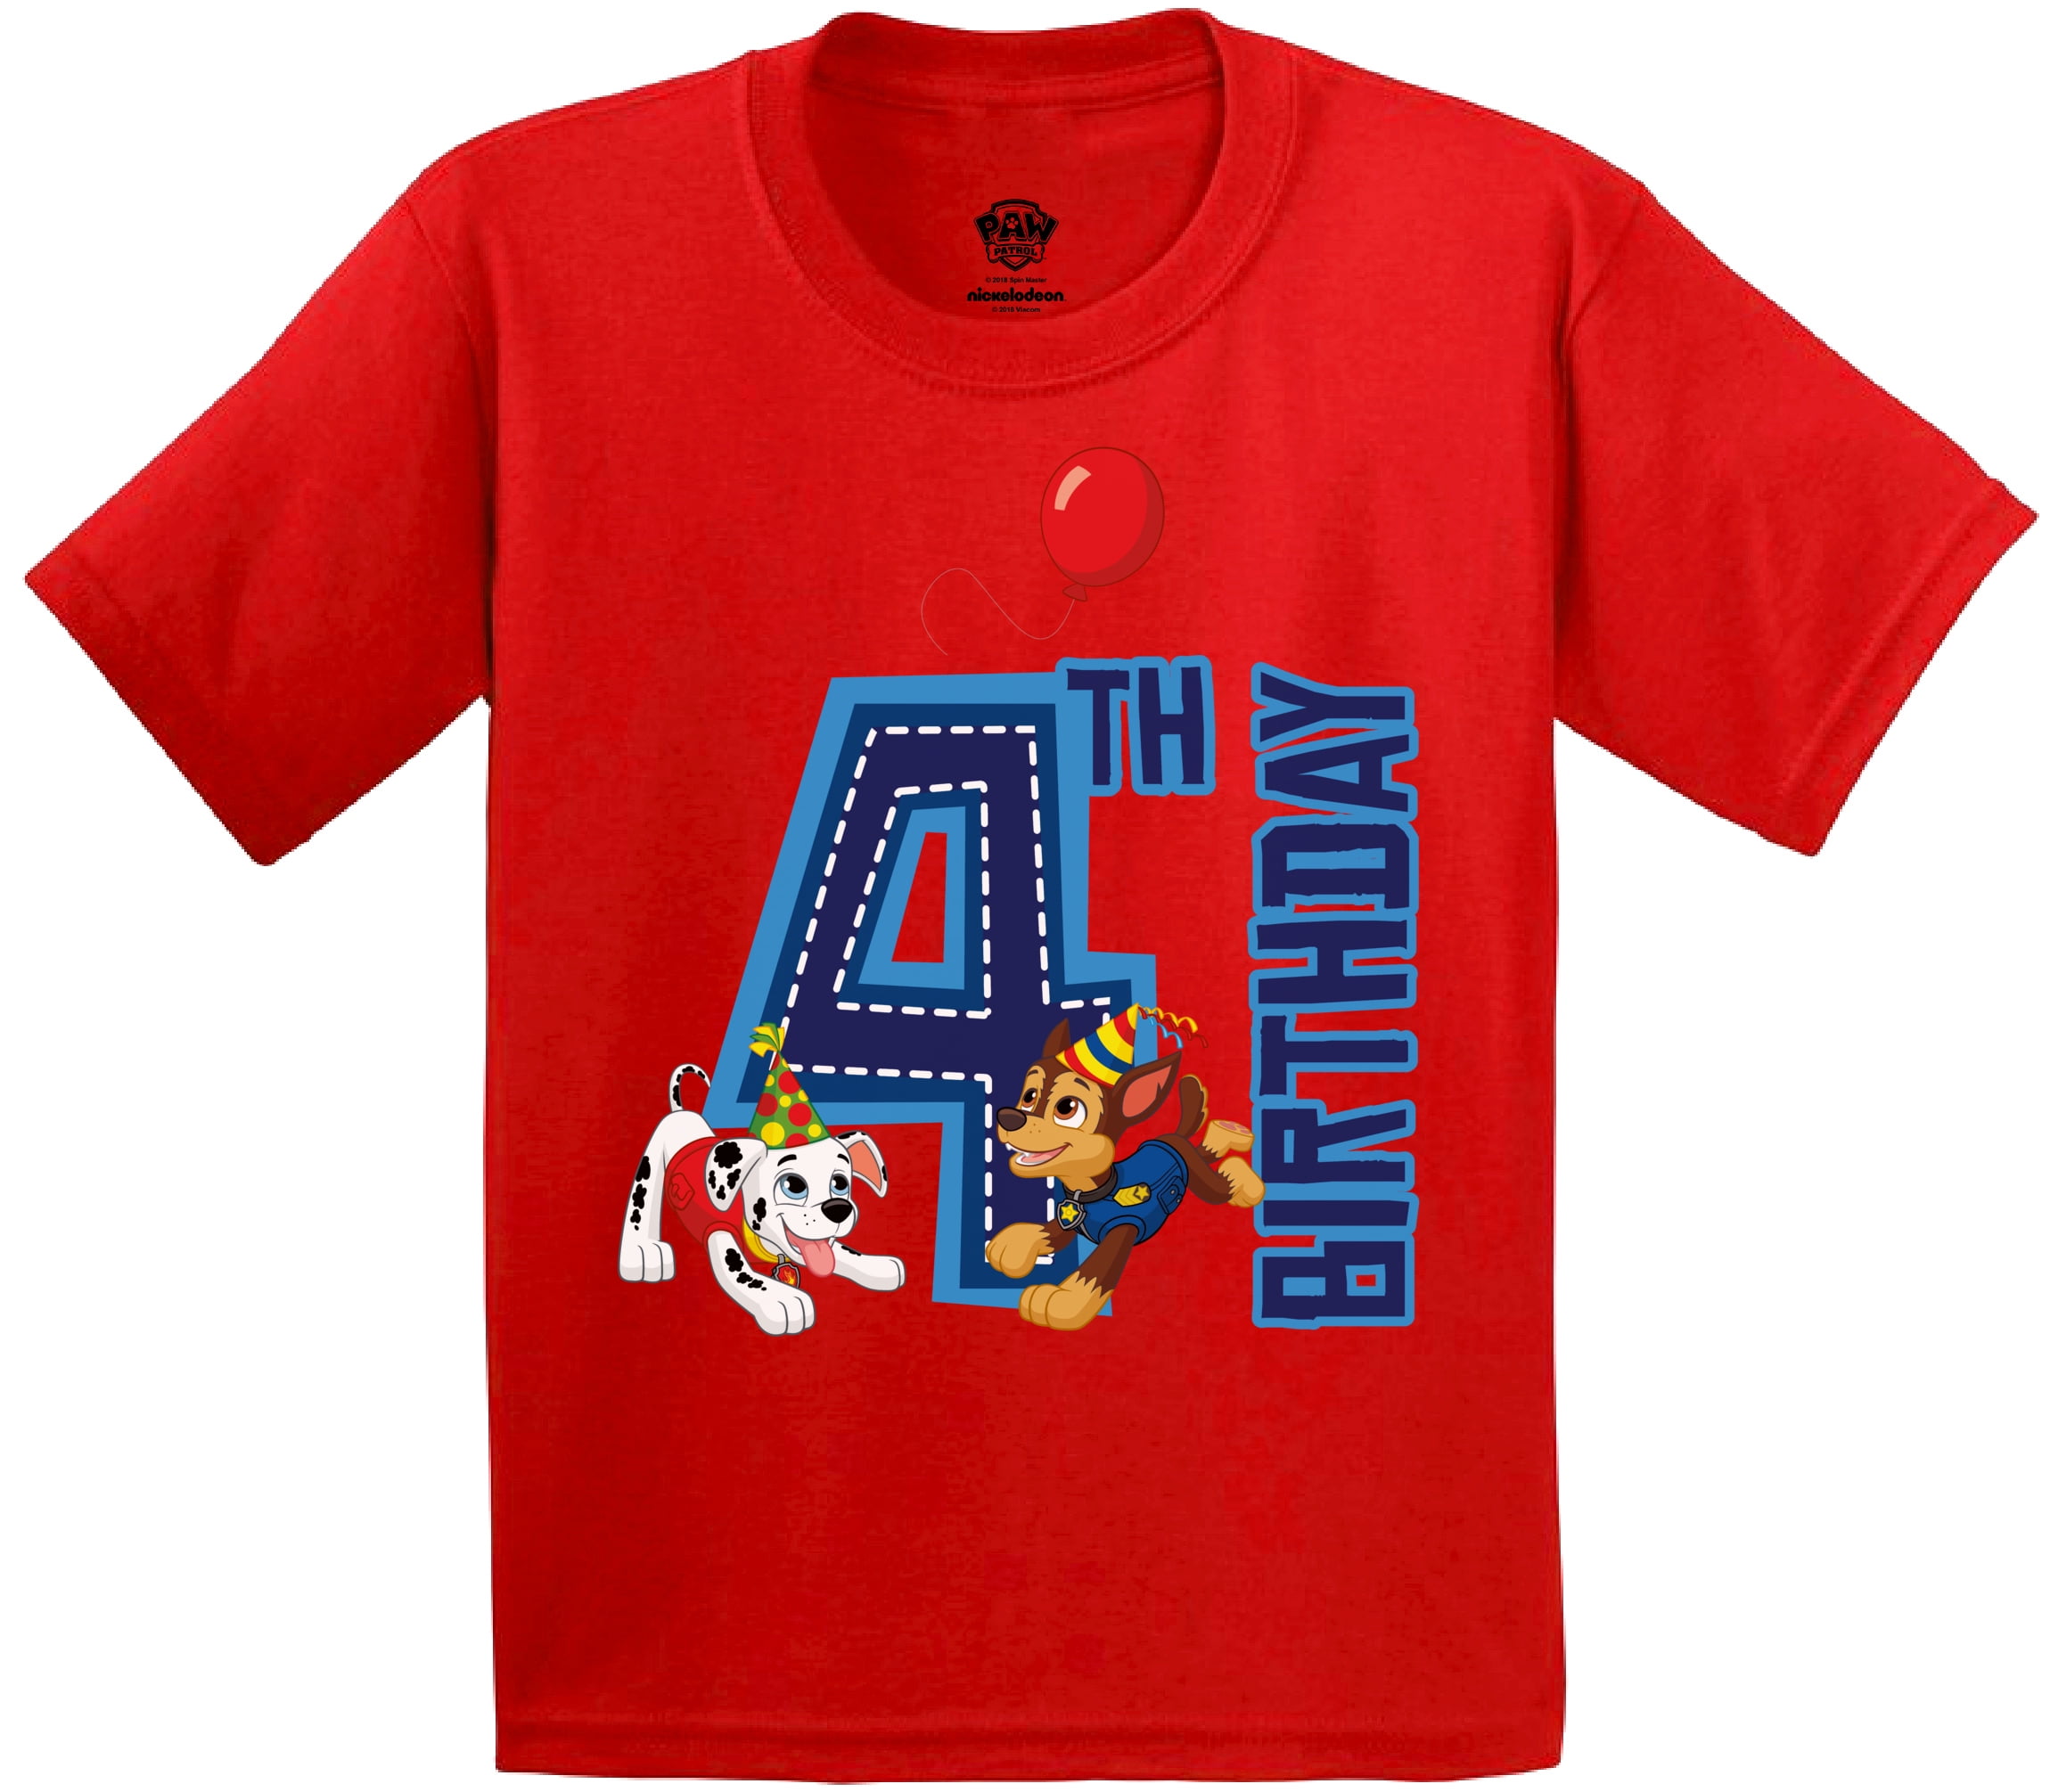 Paw Patrol Birthday Shirts Chase Marshall Add ANY name & ANY age VISIT OUR SHOP!! FREE SHIPPING Skye Birthday Shirt Everest FAMILY Birthday Shirt Girl Paw Patrol Birthday Shirt Skye 